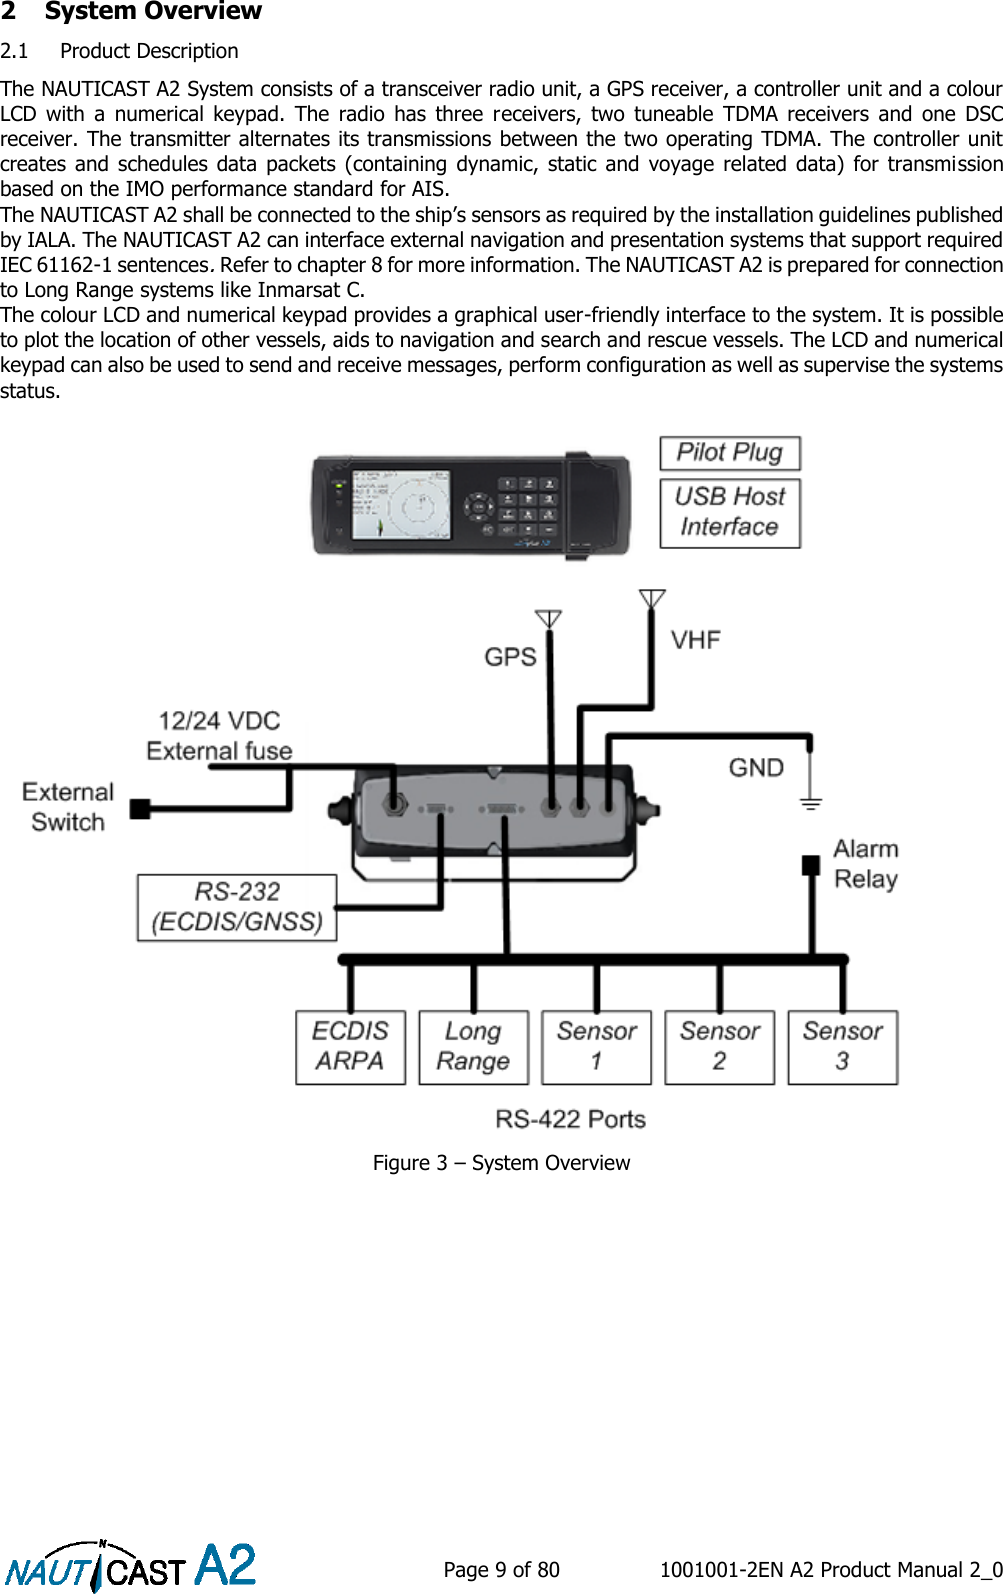    Page 9 of 80  1001001-2EN A2 Product Manual 2_0   2 System Overview 2.1 Product Description The NAUTICAST A2 System consists of a transceiver radio unit, a GPS receiver, a controller unit and a colour LCD  with  a  numerical  keypad.  The  radio  has  three  receivers,  two  tuneable  TDMA  receivers  and  one  DSC receiver. The transmitter alternates its transmissions between the two operating TDMA. The controller unit creates  and  schedules data packets  (containing  dynamic, static  and  voyage related  data) for transmission based on the IMO performance standard for AIS. The NAUTICAST A2 shall be connected to the ship’s sensors as required by the installation guidelines published by IALA. The NAUTICAST A2 can interface external navigation and presentation systems that support required IEC 61162-1 sentences. Refer to chapter 8 for more information. The NAUTICAST A2 is prepared for connection to Long Range systems like Inmarsat C. The colour LCD and numerical keypad provides a graphical user-friendly interface to the system. It is possible to plot the location of other vessels, aids to navigation and search and rescue vessels. The LCD and numerical keypad can also be used to send and receive messages, perform configuration as well as supervise the systems status.   Figure 3 – System Overview 